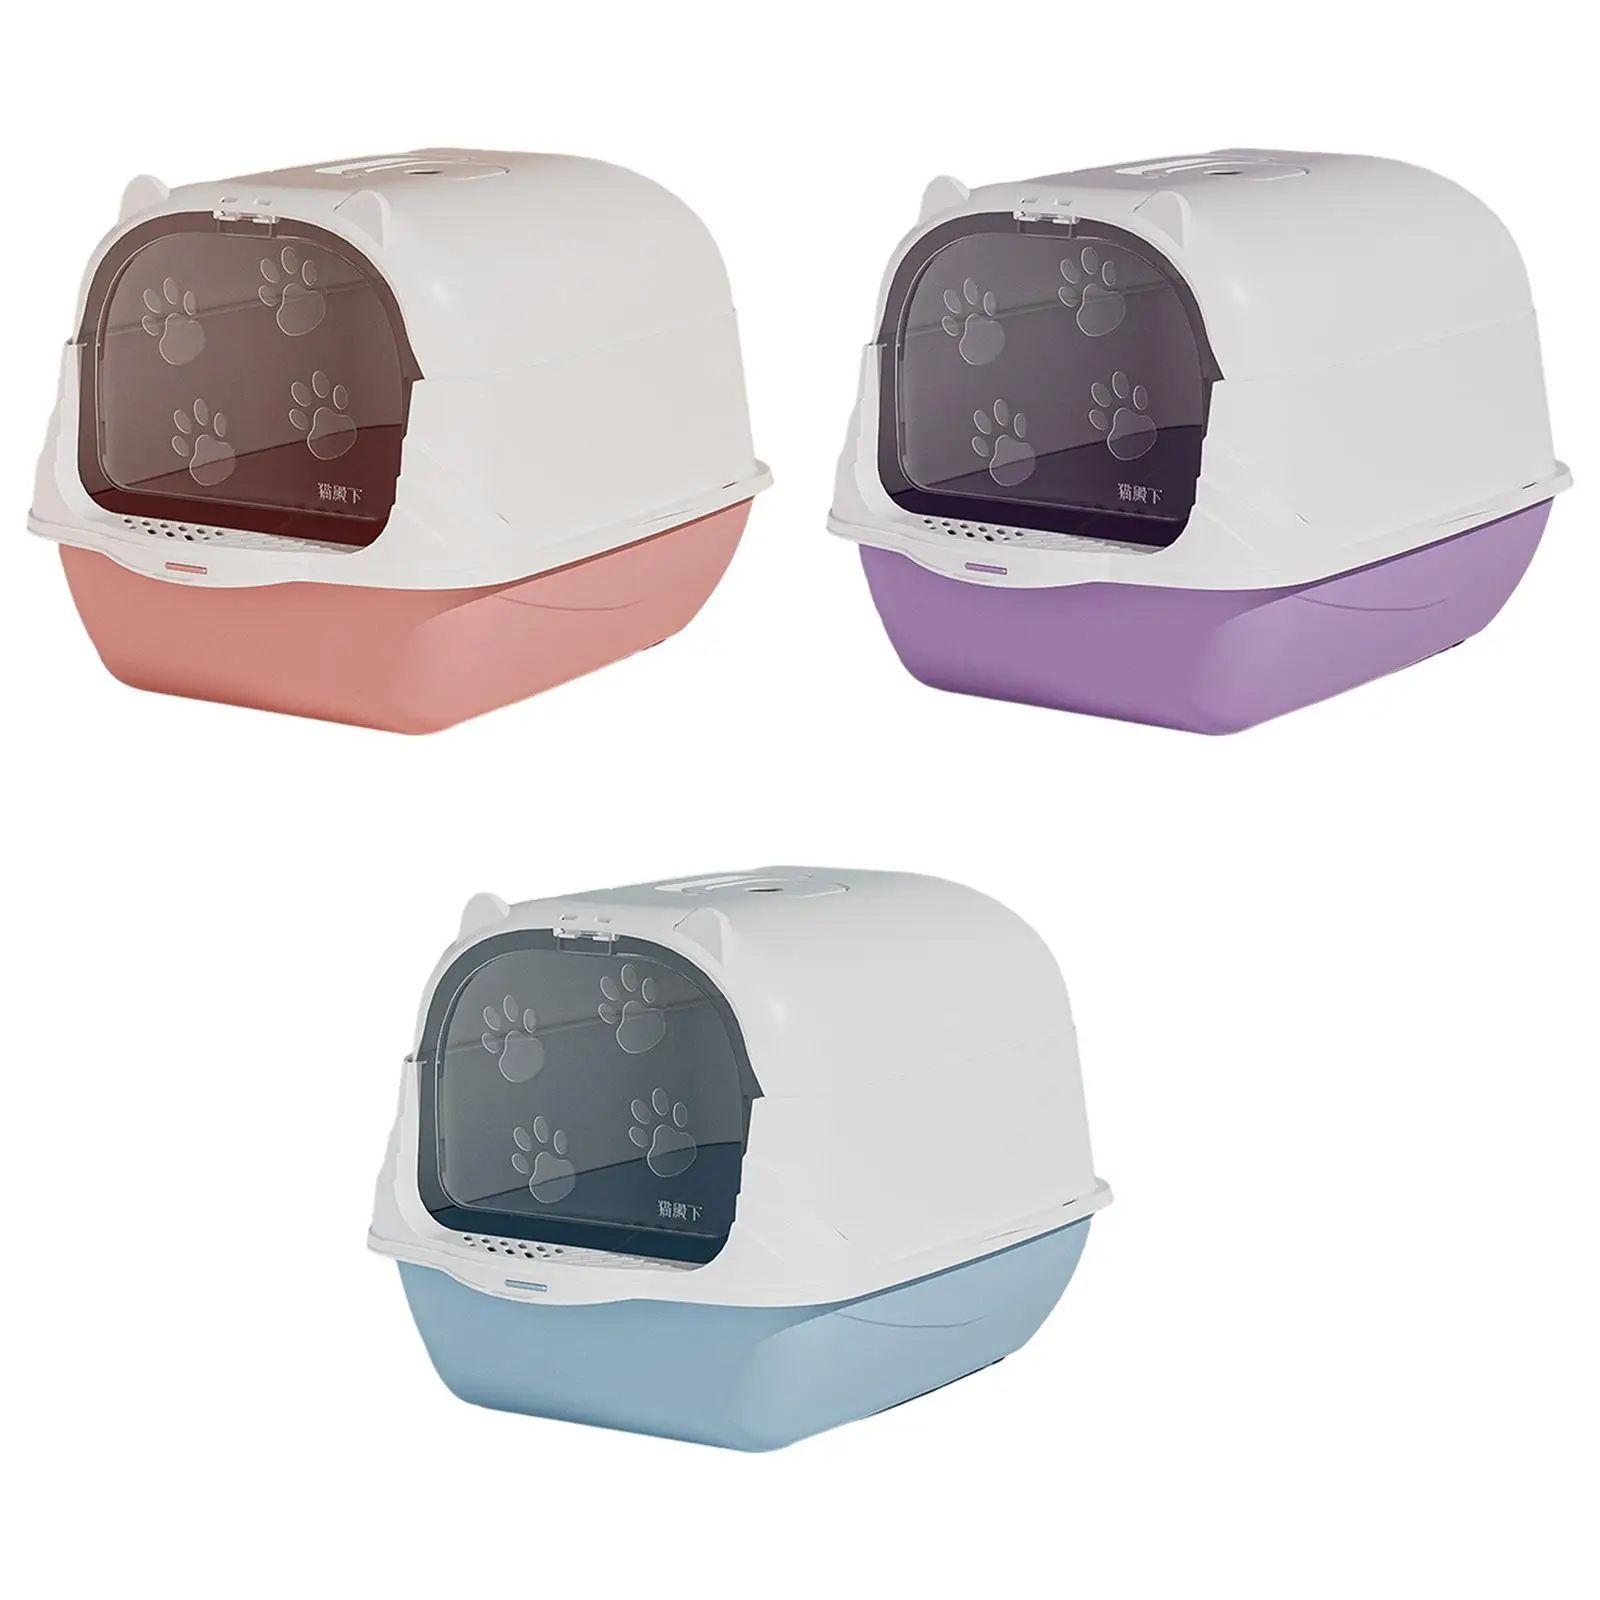 Hooded Cat Litter Box with Lid Enclosed Cat Toilet Hooded Pet Litter Tray with Front Door Durable Pet Litter Box Pet Accessories